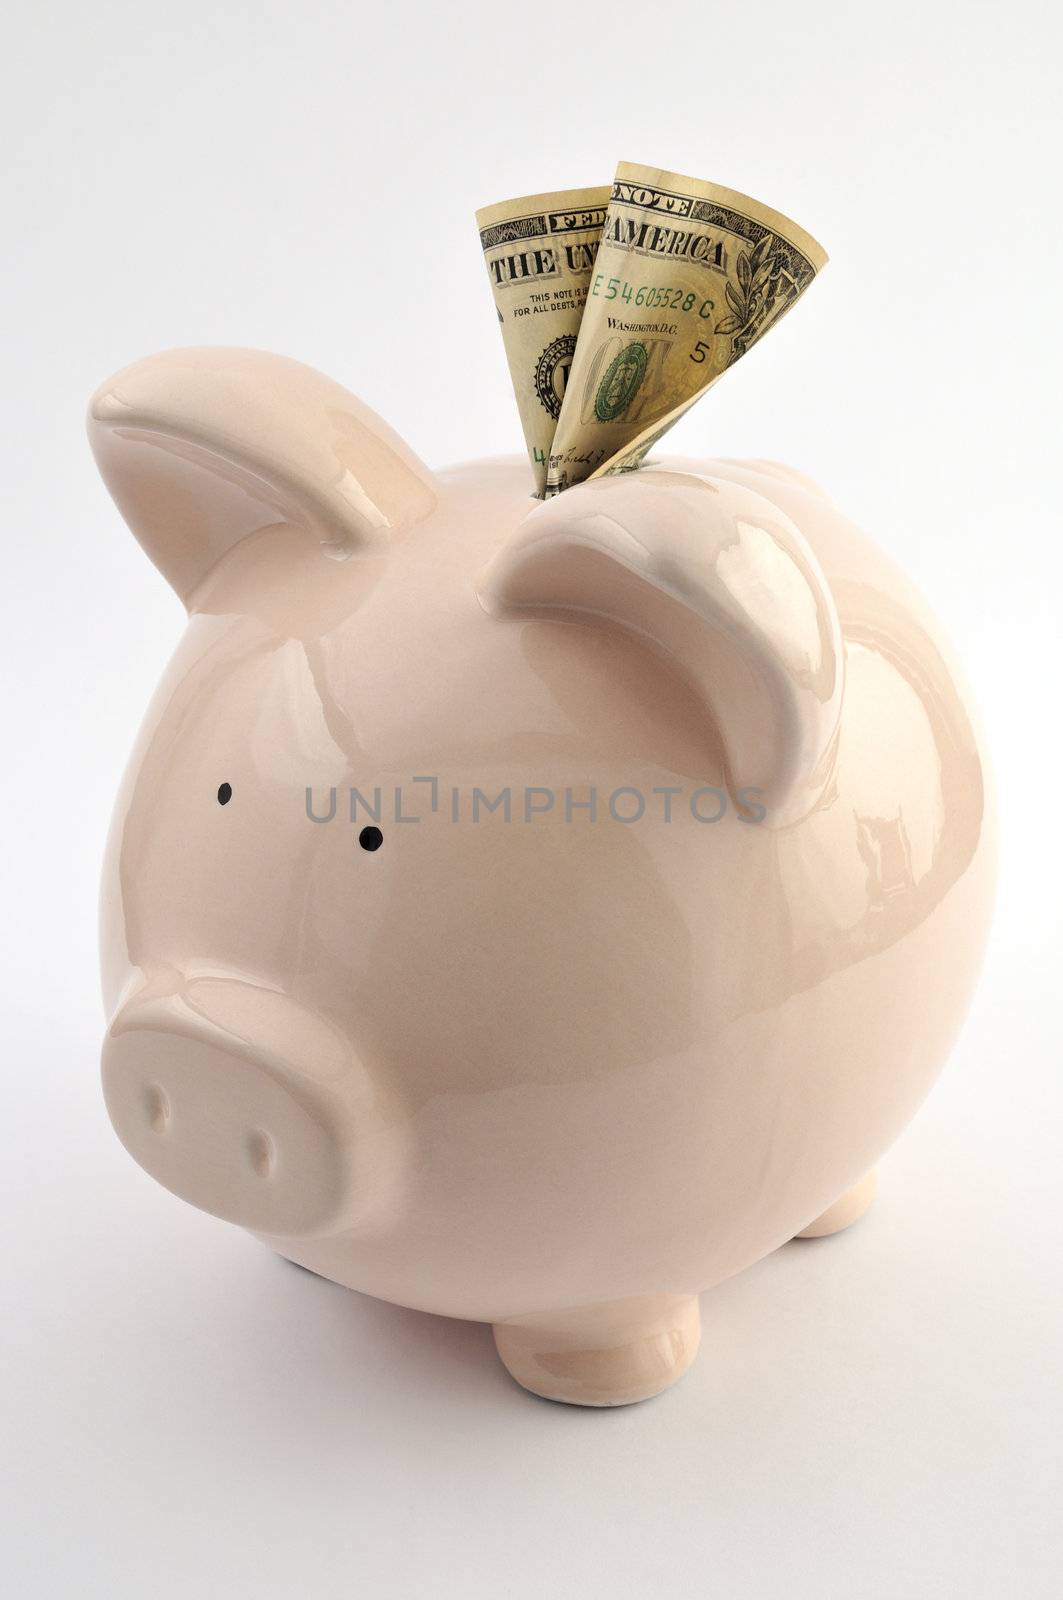 Ceramic piggy bank with one dollar note, isolated on white background